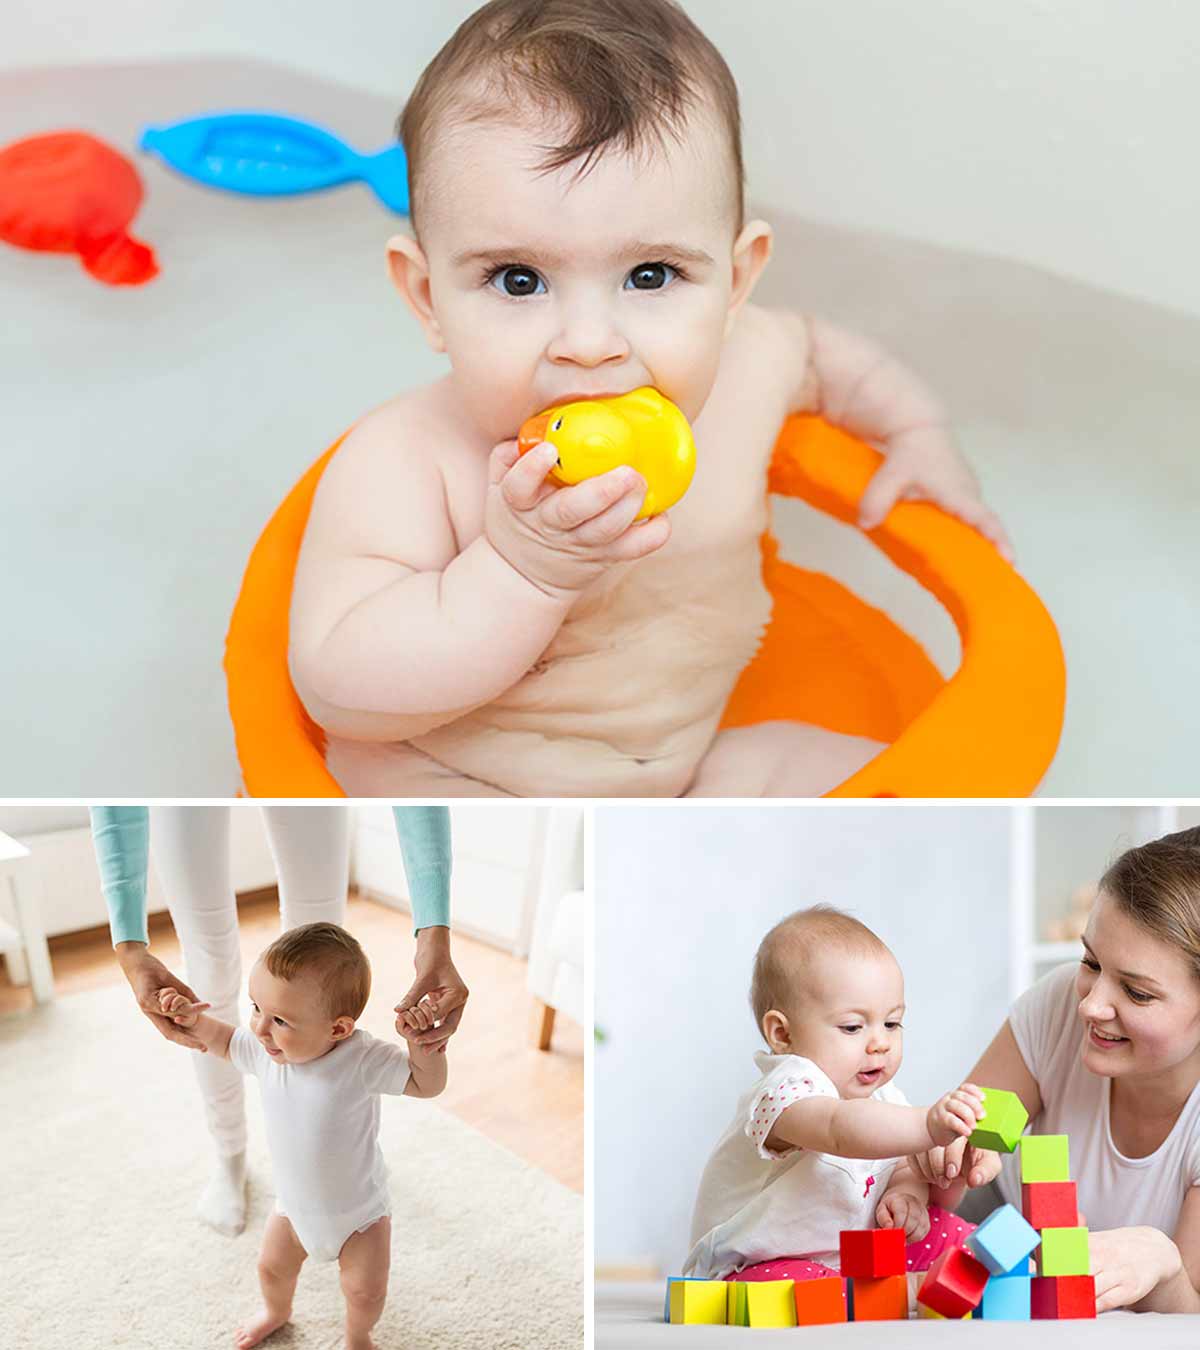 15+ Games And Activities For 6-Month-Old Baby